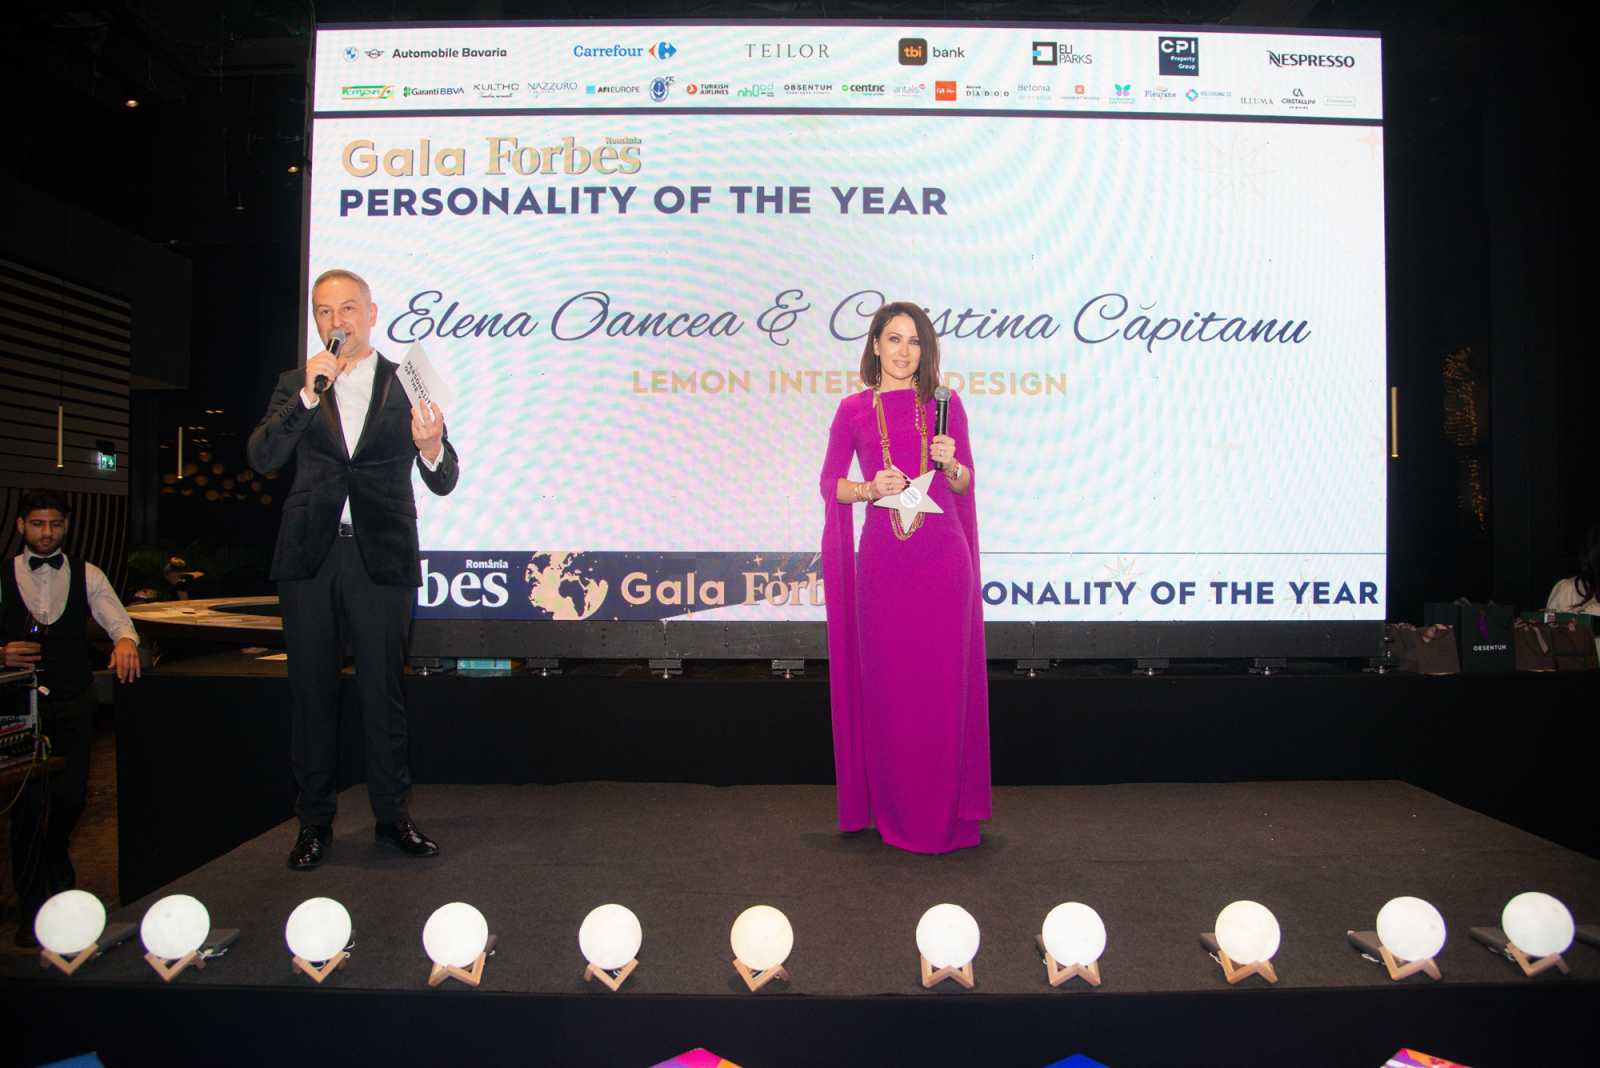 awarded at the Forbes Personality of the Year Gala 2